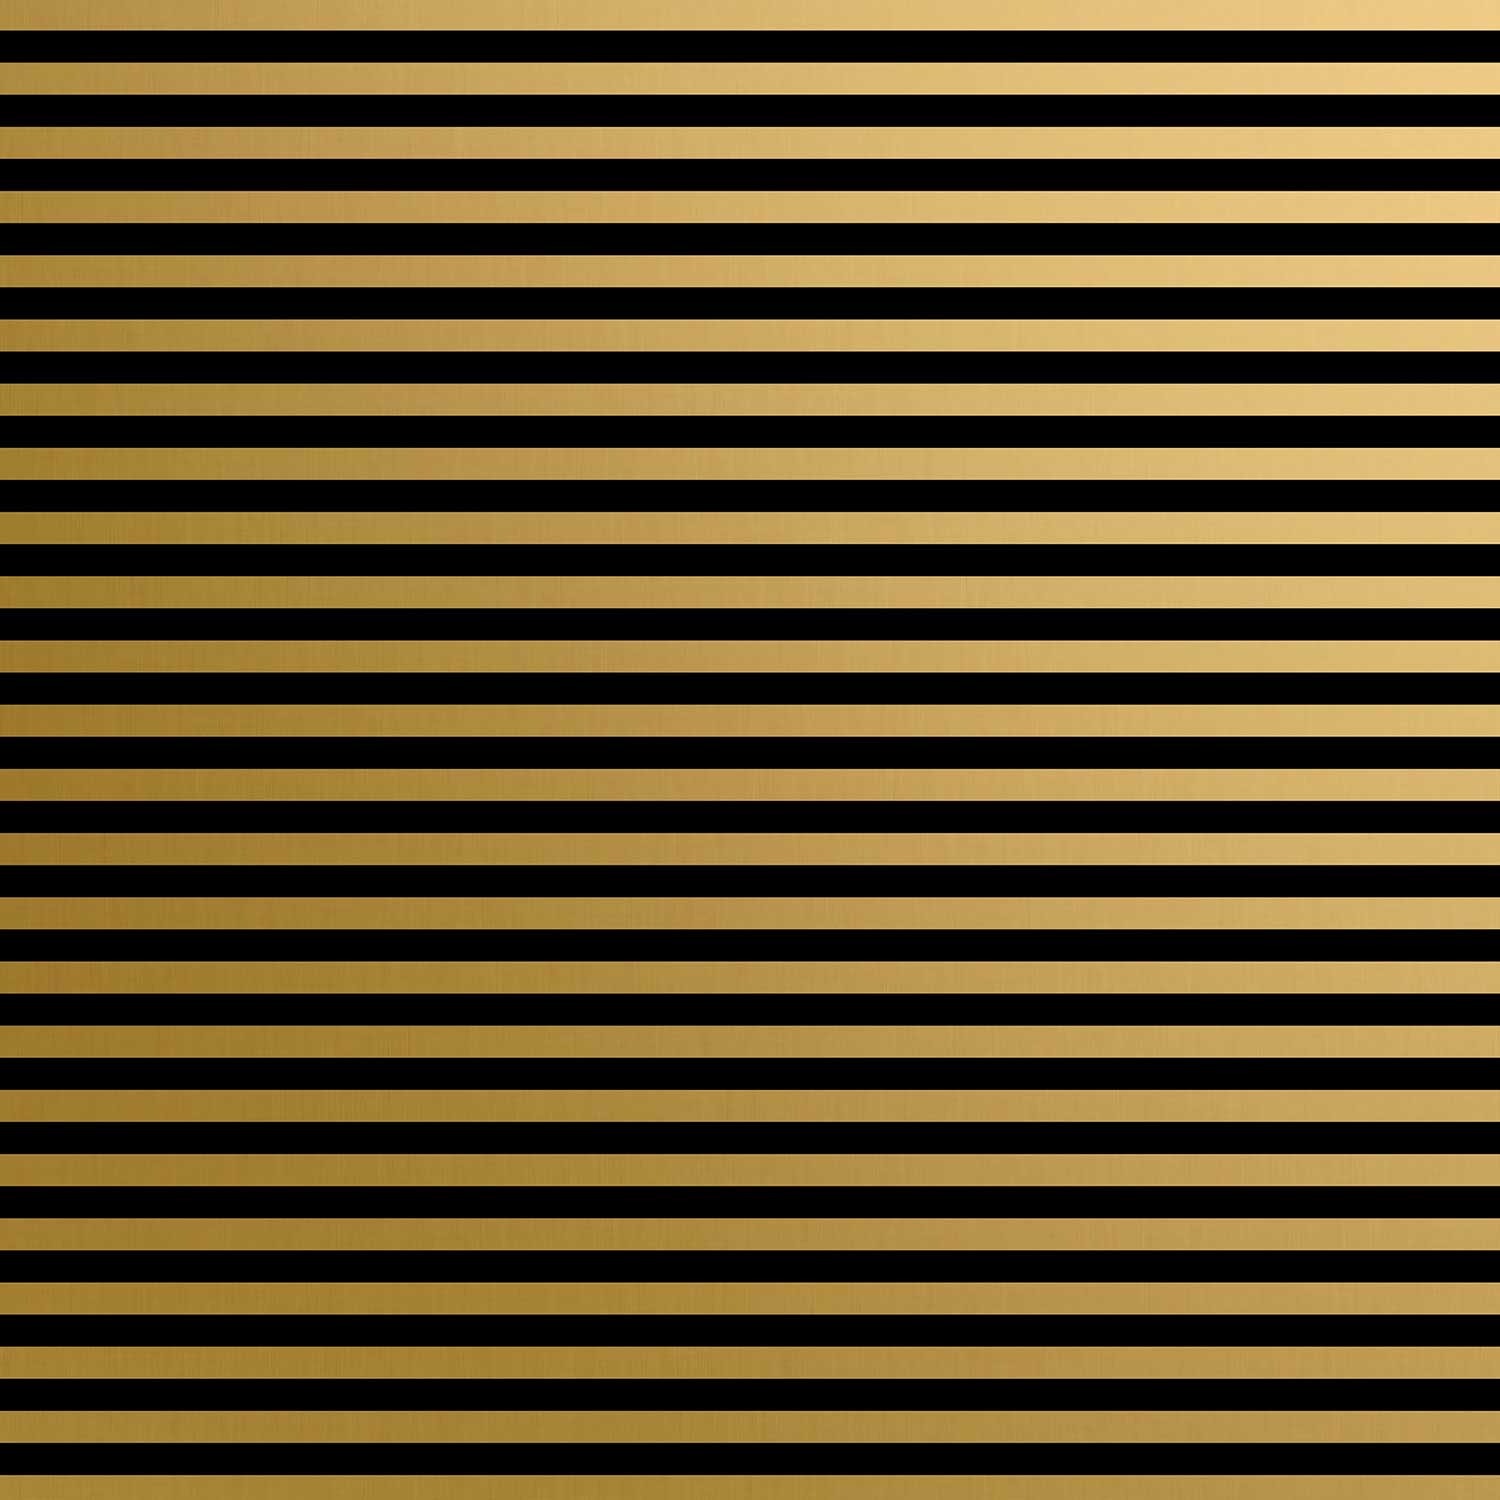 Black & Gold Stripes Gift Wrap 1/4 Ream 208 ft x 24 in